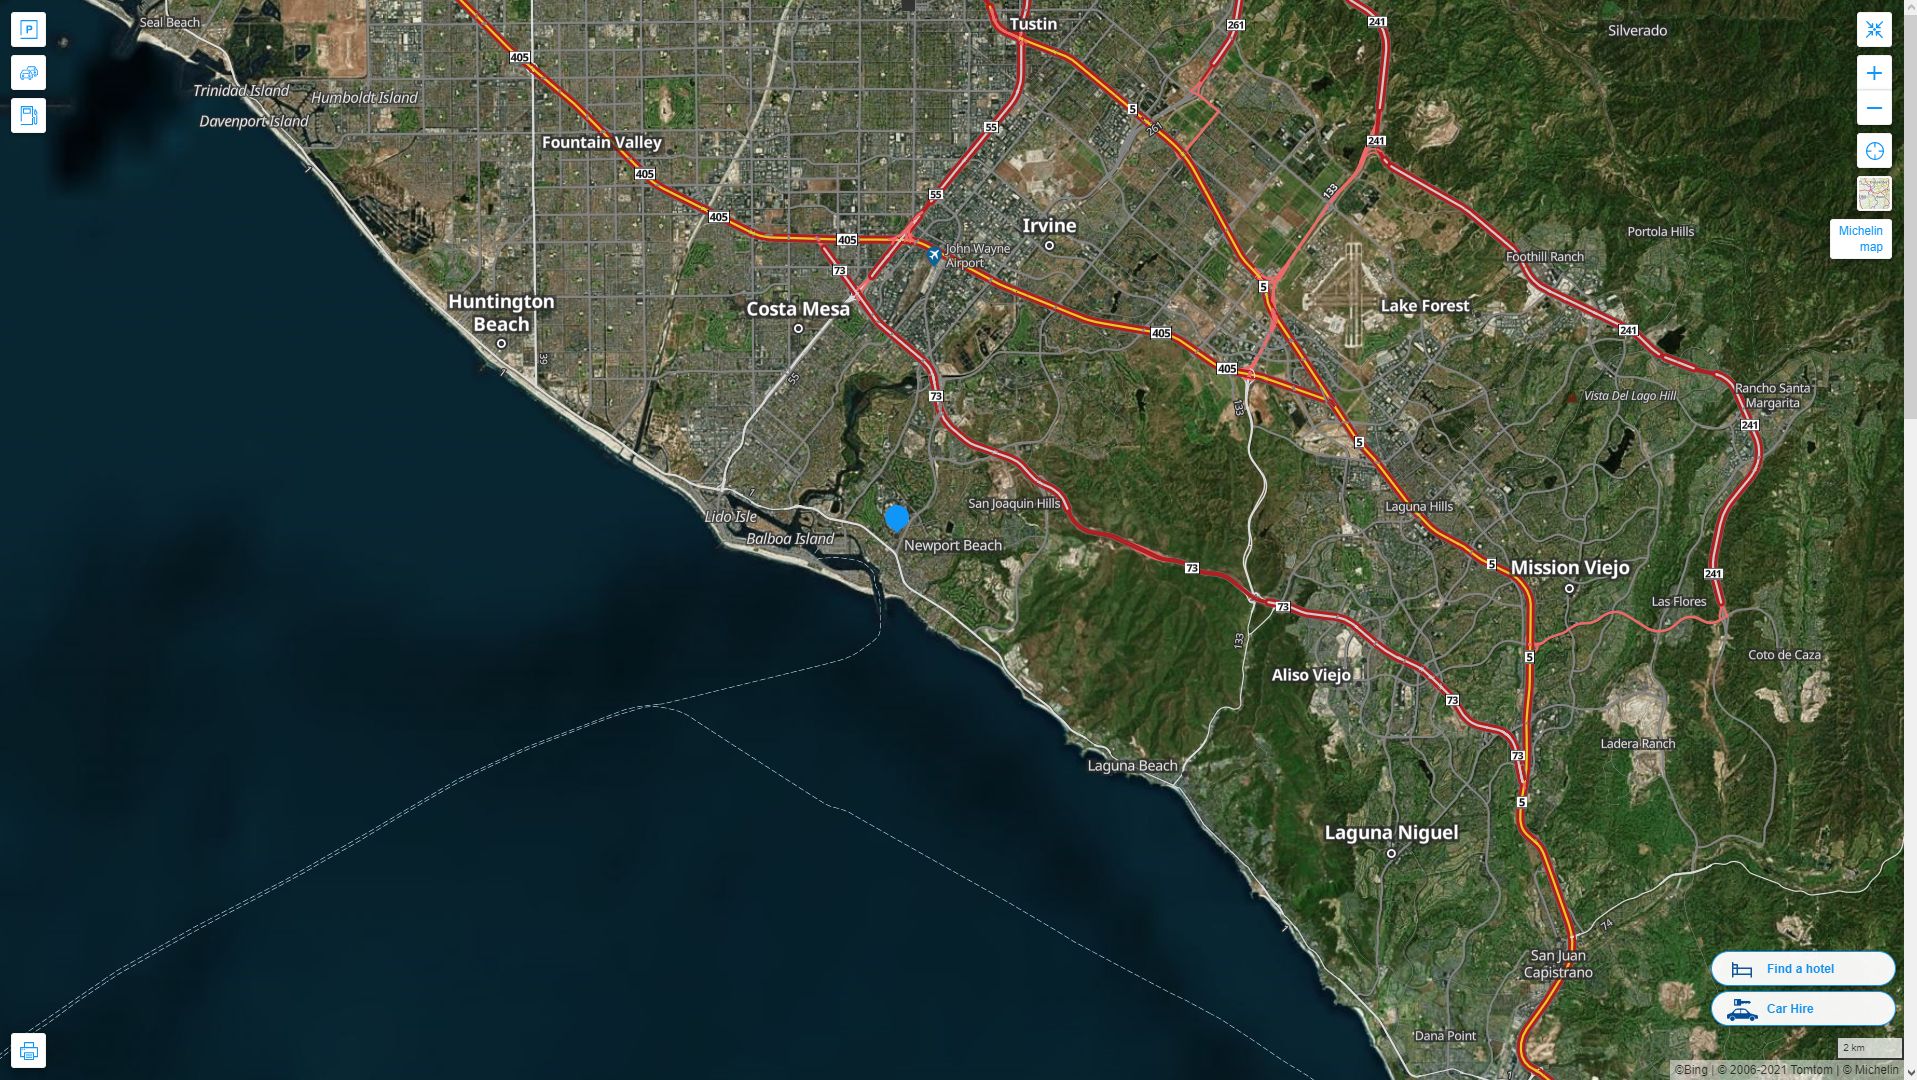 Newport Beach California Highway and Road Map with Satellite View